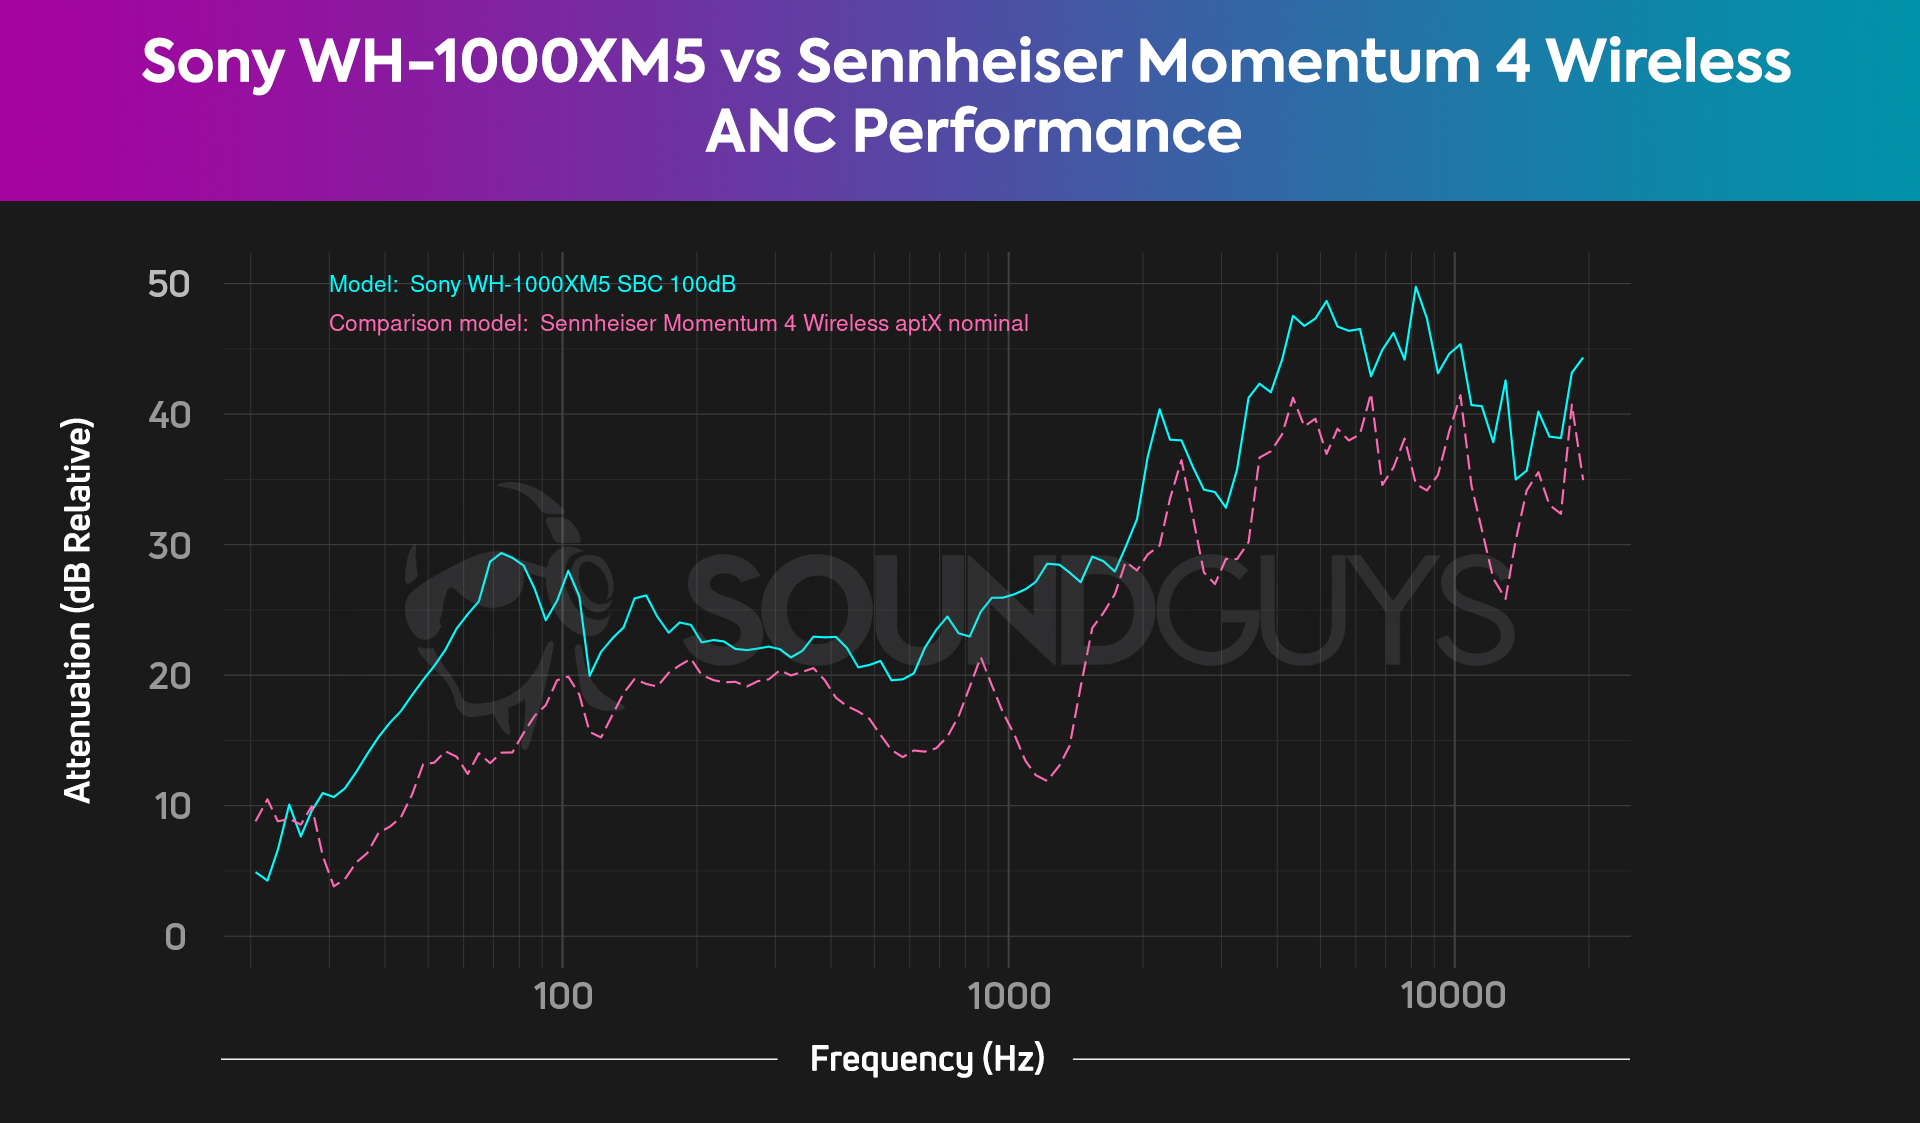 A noise canceling comparison chart between the Sony WH-1000XM5 and the Sennheiser Momentum 4 Wireless, which shows better noise canceling from the Sony headphones.